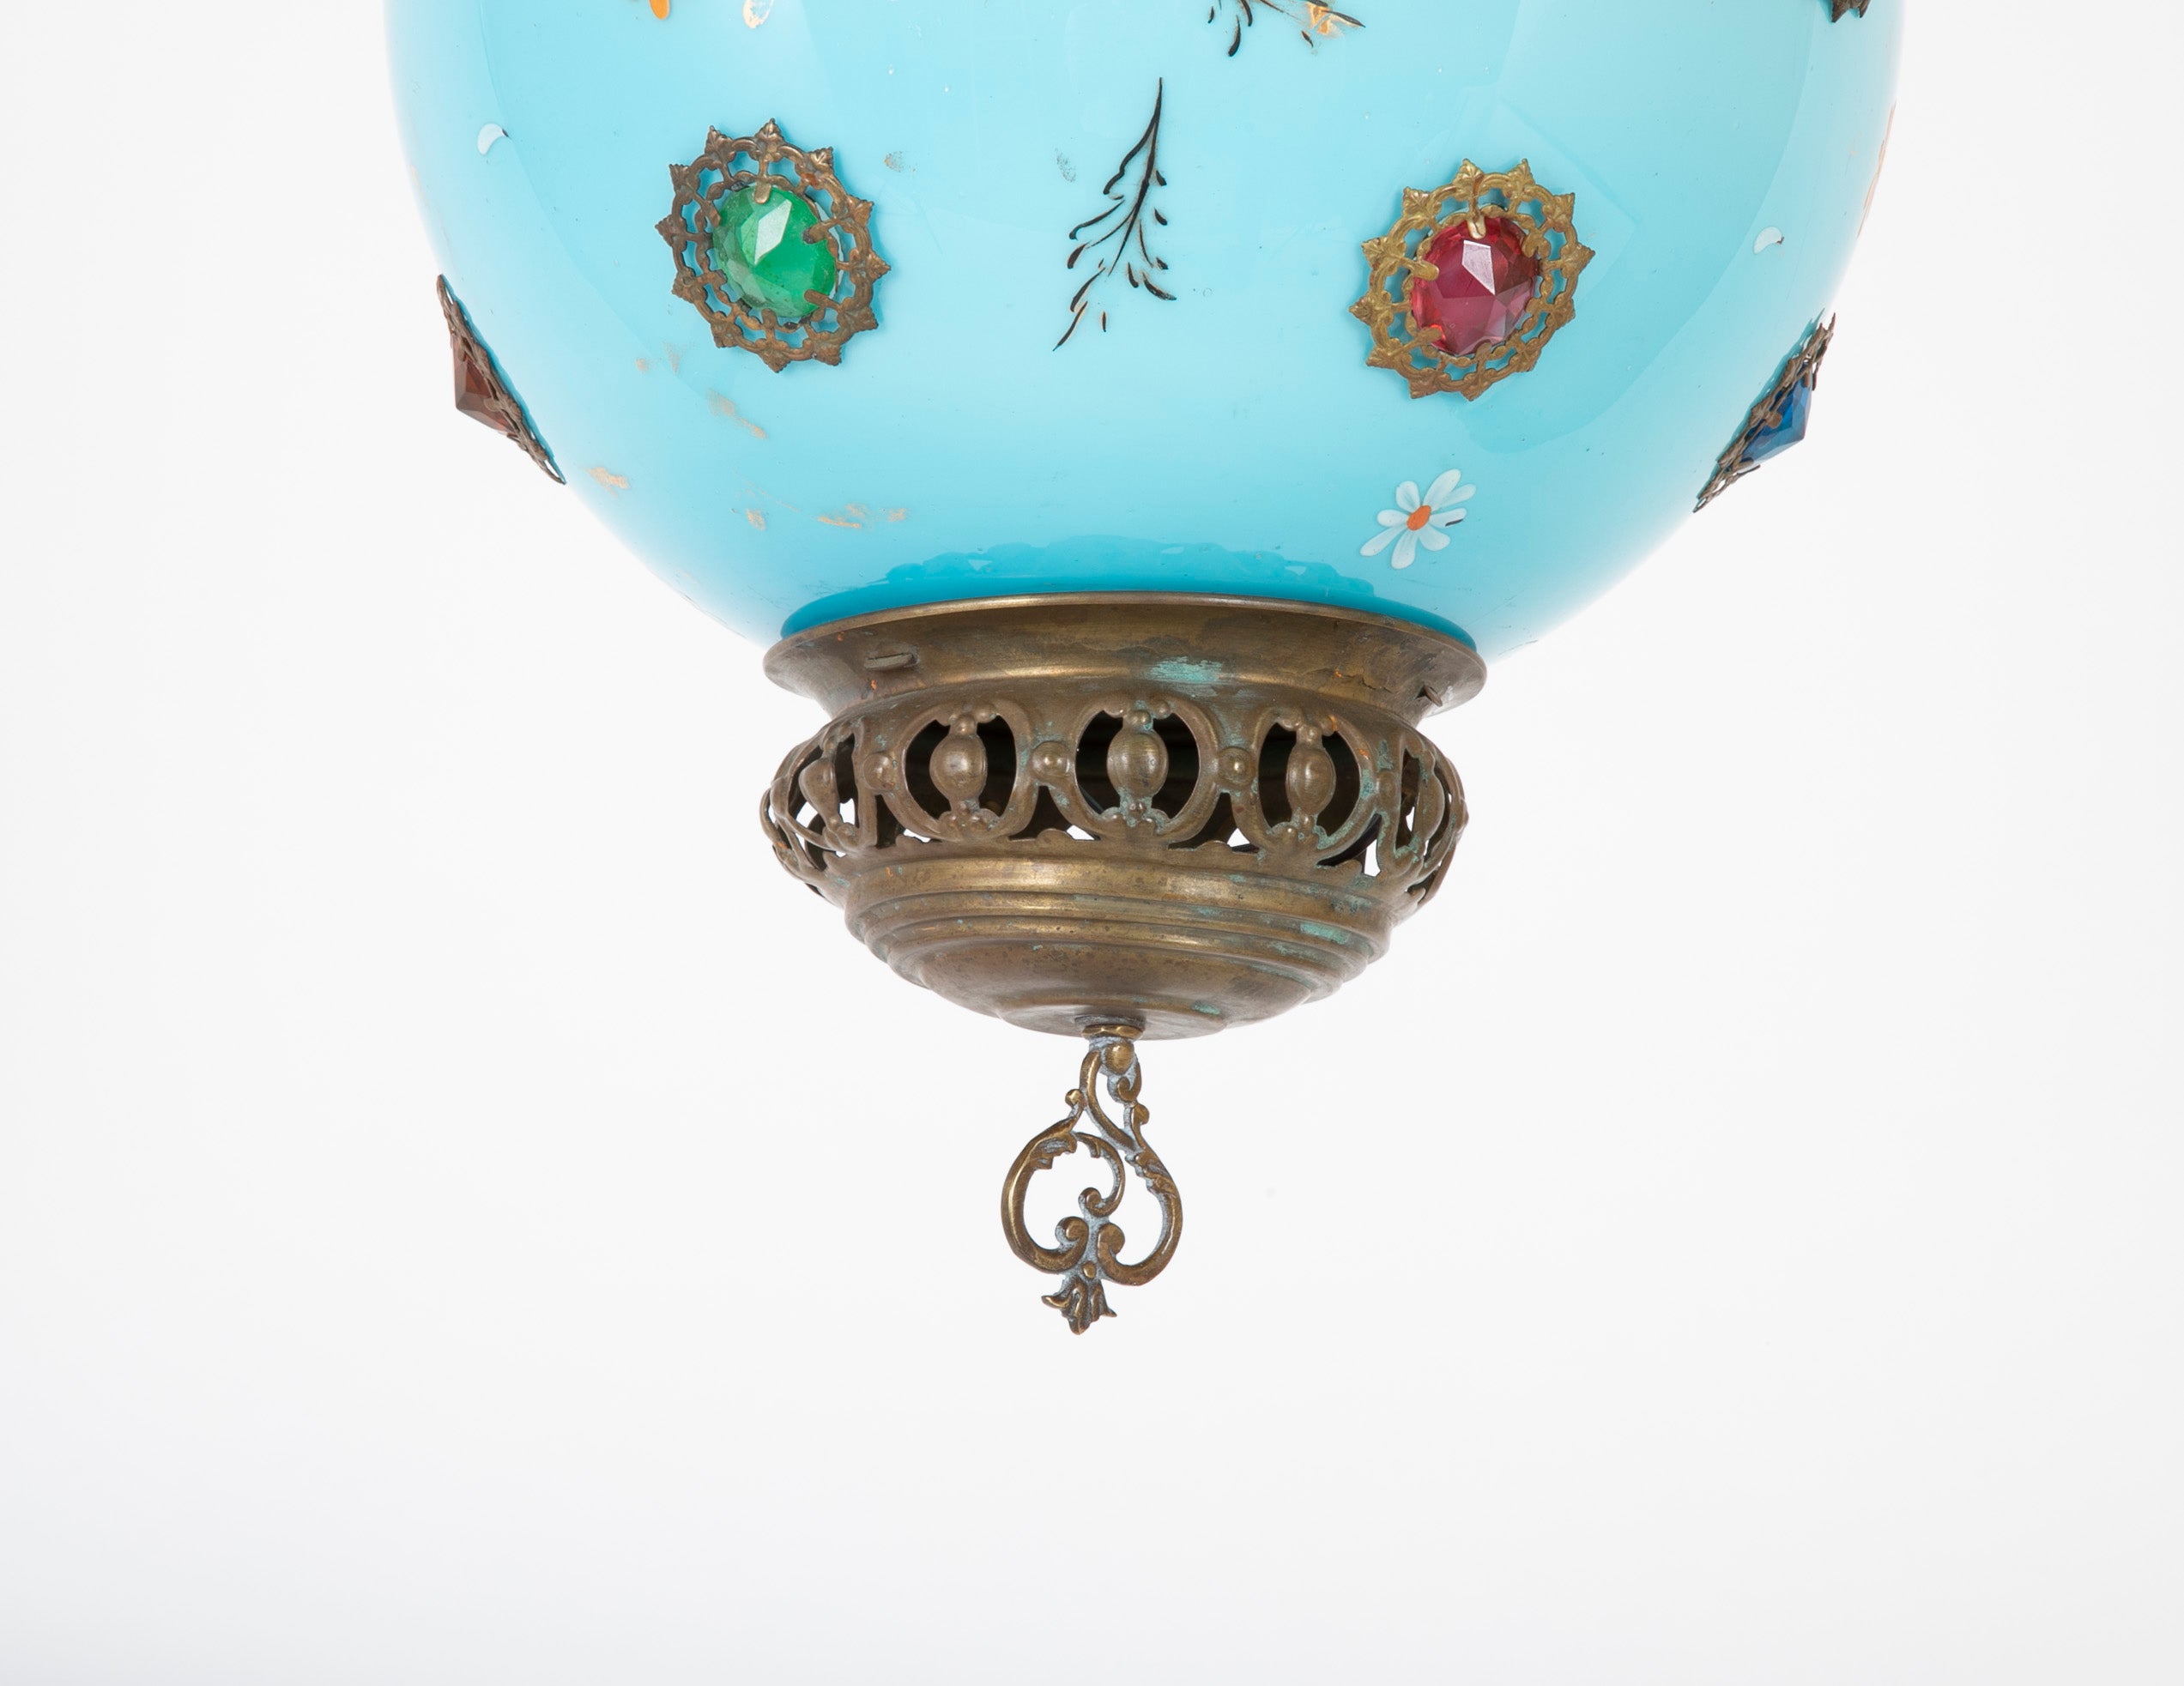 Early 20th Century Turquoise Bohemian Glass Pendant Light